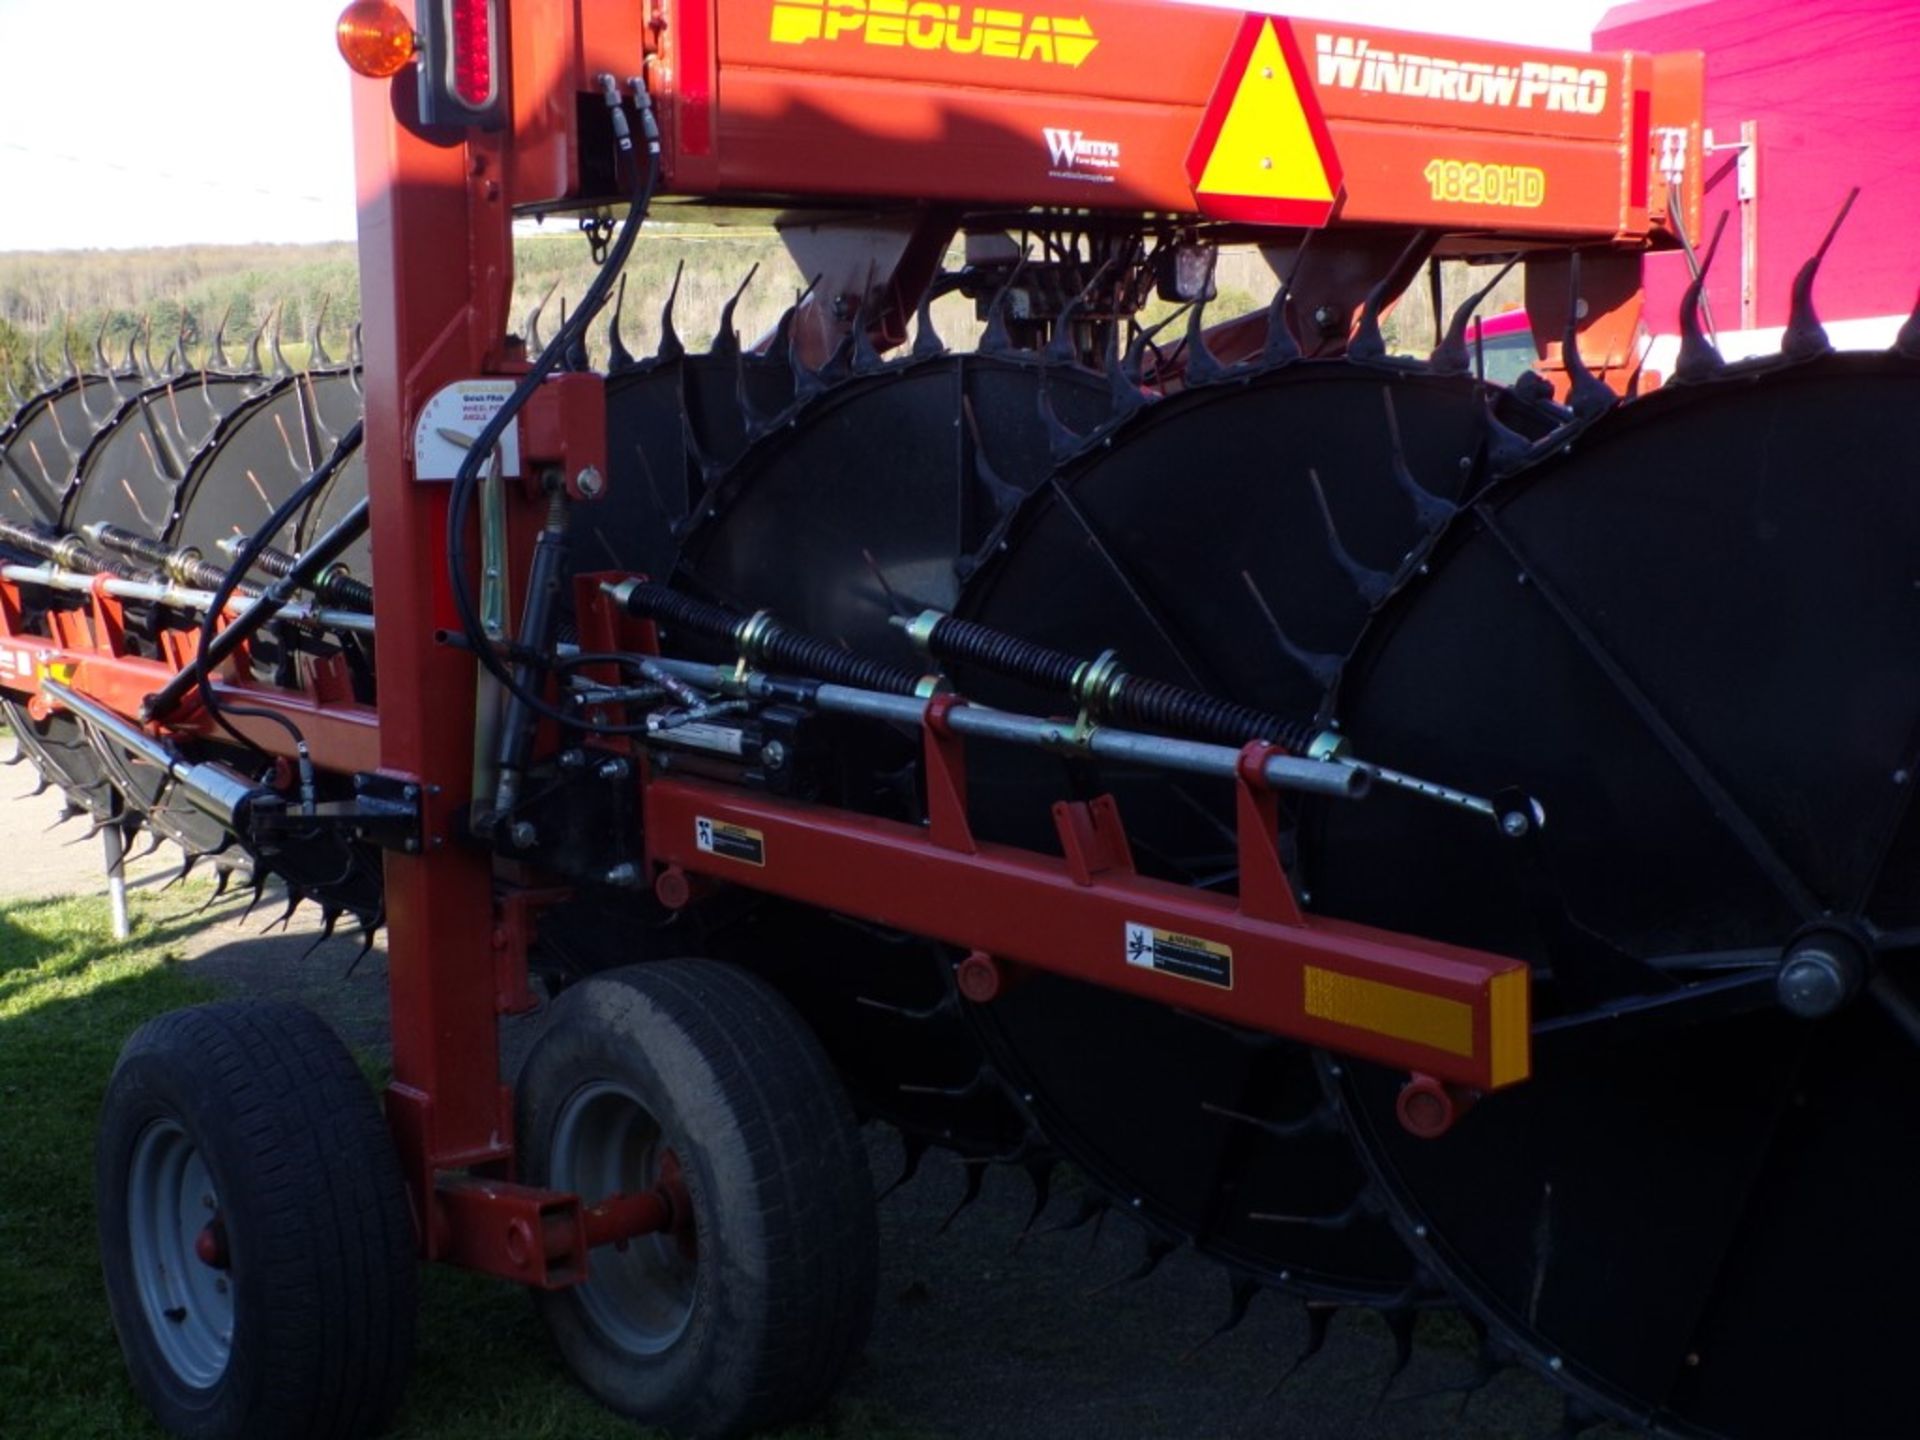 Pequea Windro Pro 1820HD Hyd. Folding Wheel Rake, 17-Wheel -Excellent Condition, Like New (6648) - Image 3 of 4